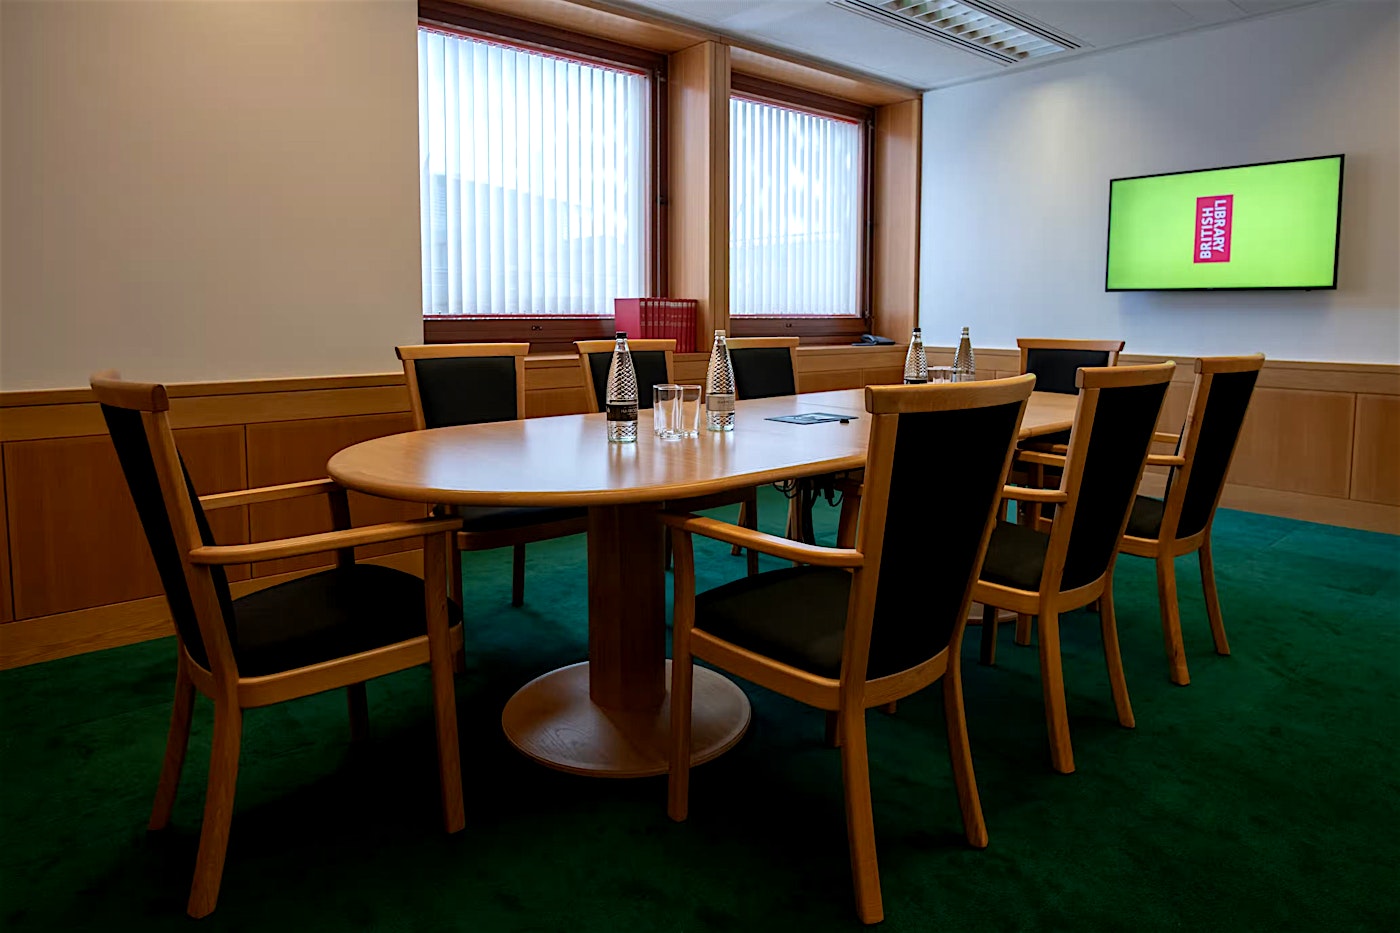 Meeting room in the British Library, London